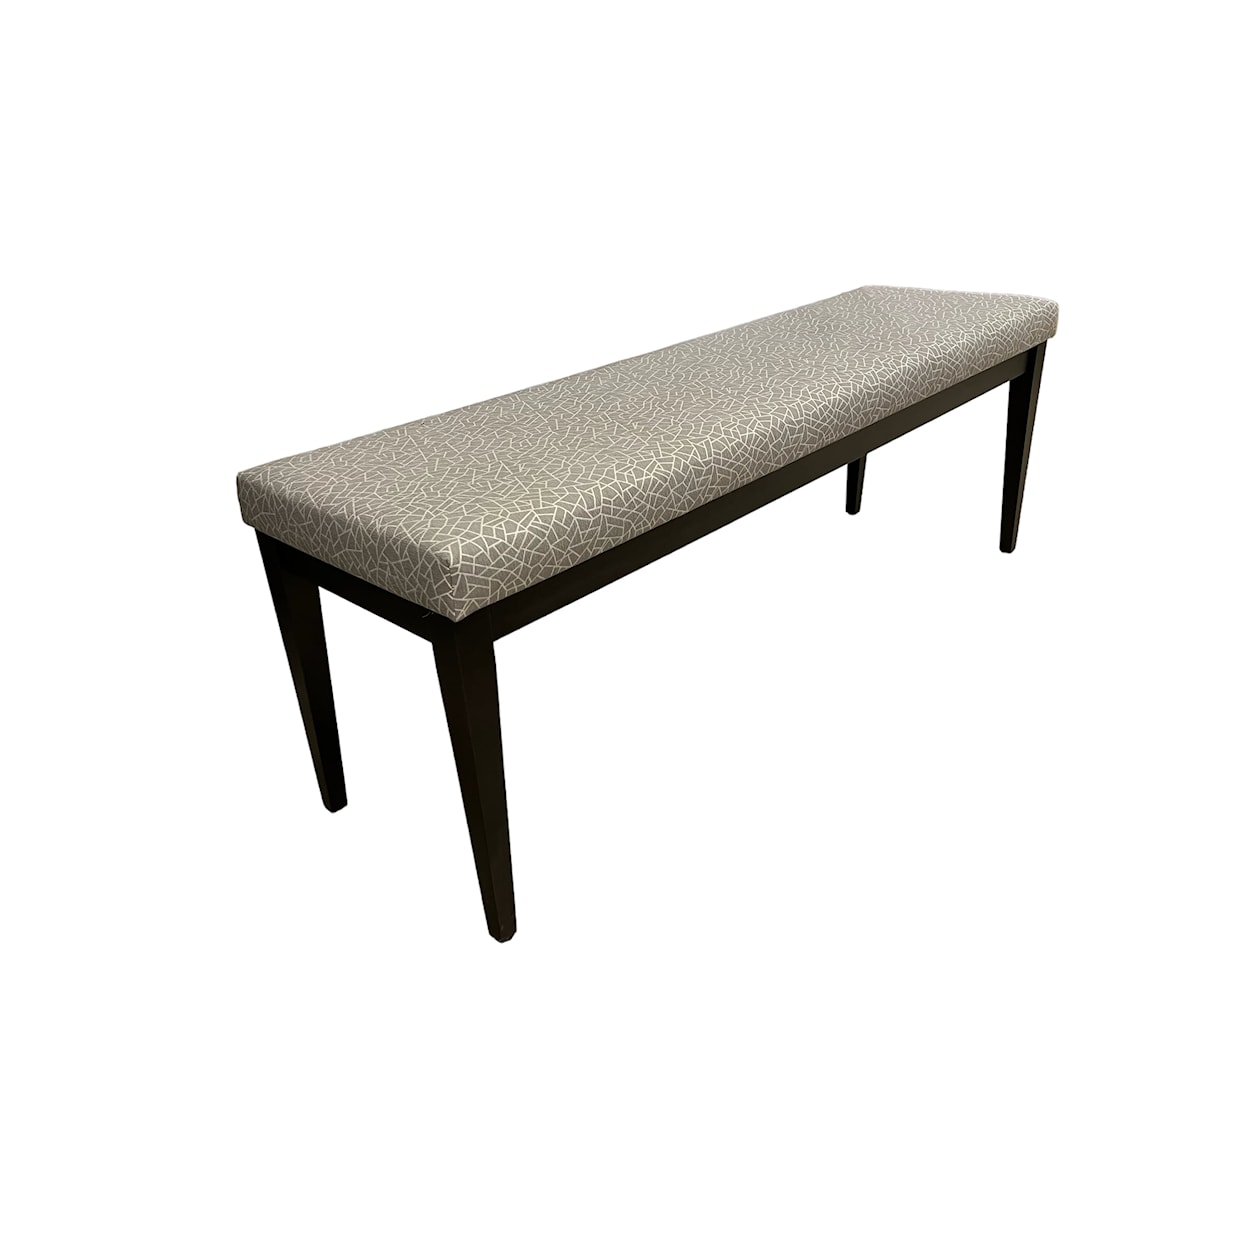 Canadel Dining Sets 0411 Bench